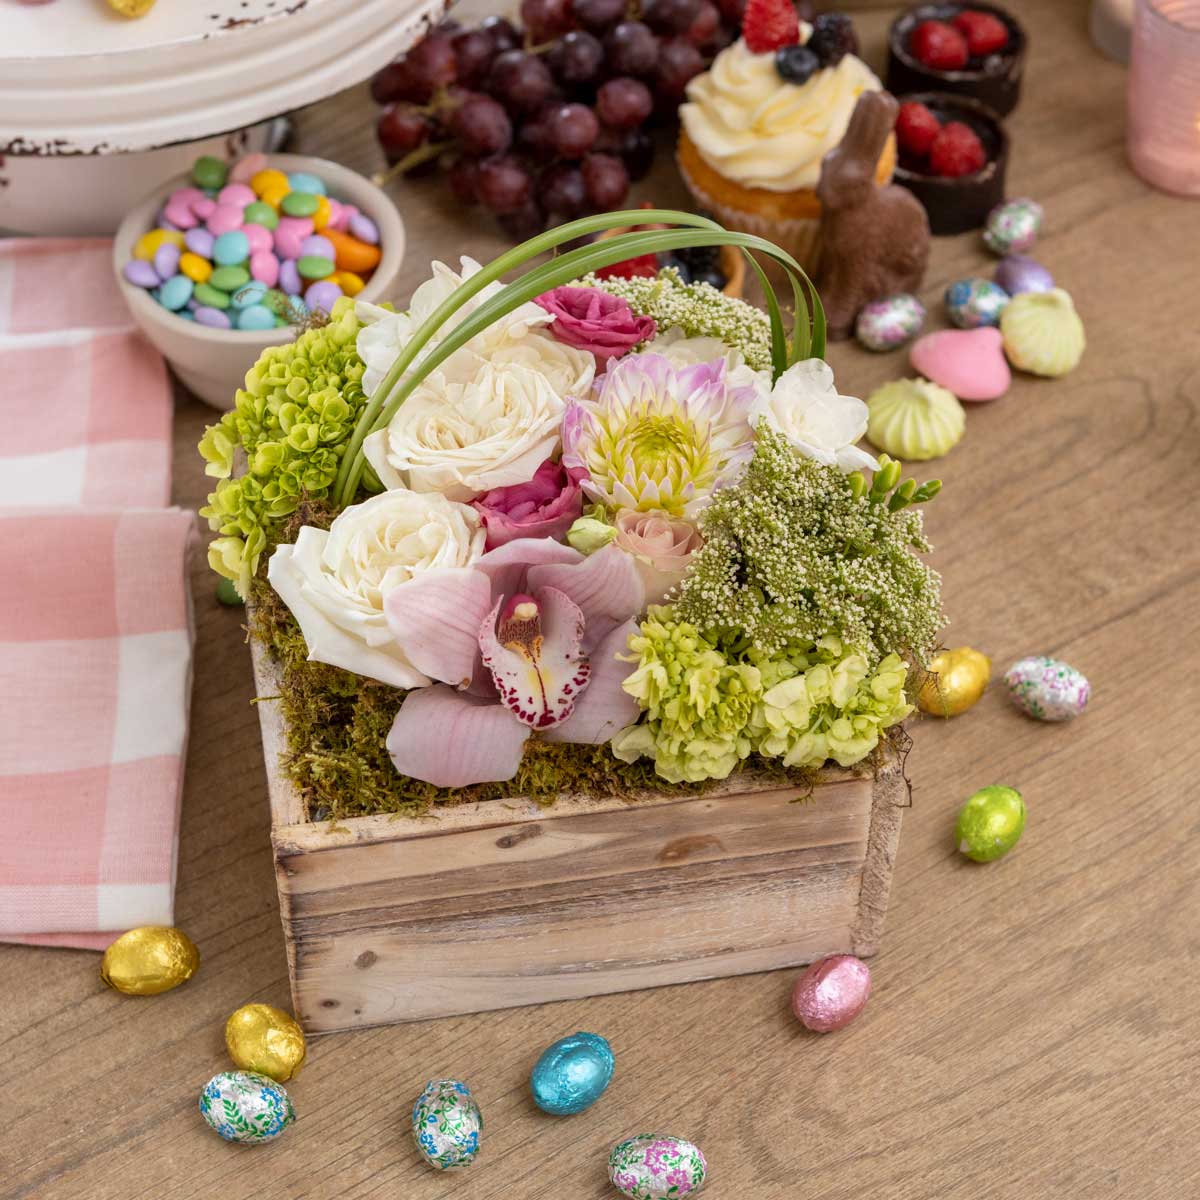 One more week to shop Olive & Cocoa for Easter! Hop on over to oliveandcocoa.com to send the Easter Bunny’s favorite, ‘Lillianna.’ 🐰 #oliveandcocoa #floraldesign #floralarrangement #floralgifts #easterflowers #flowers #springflowers #flowerdelivery #easter